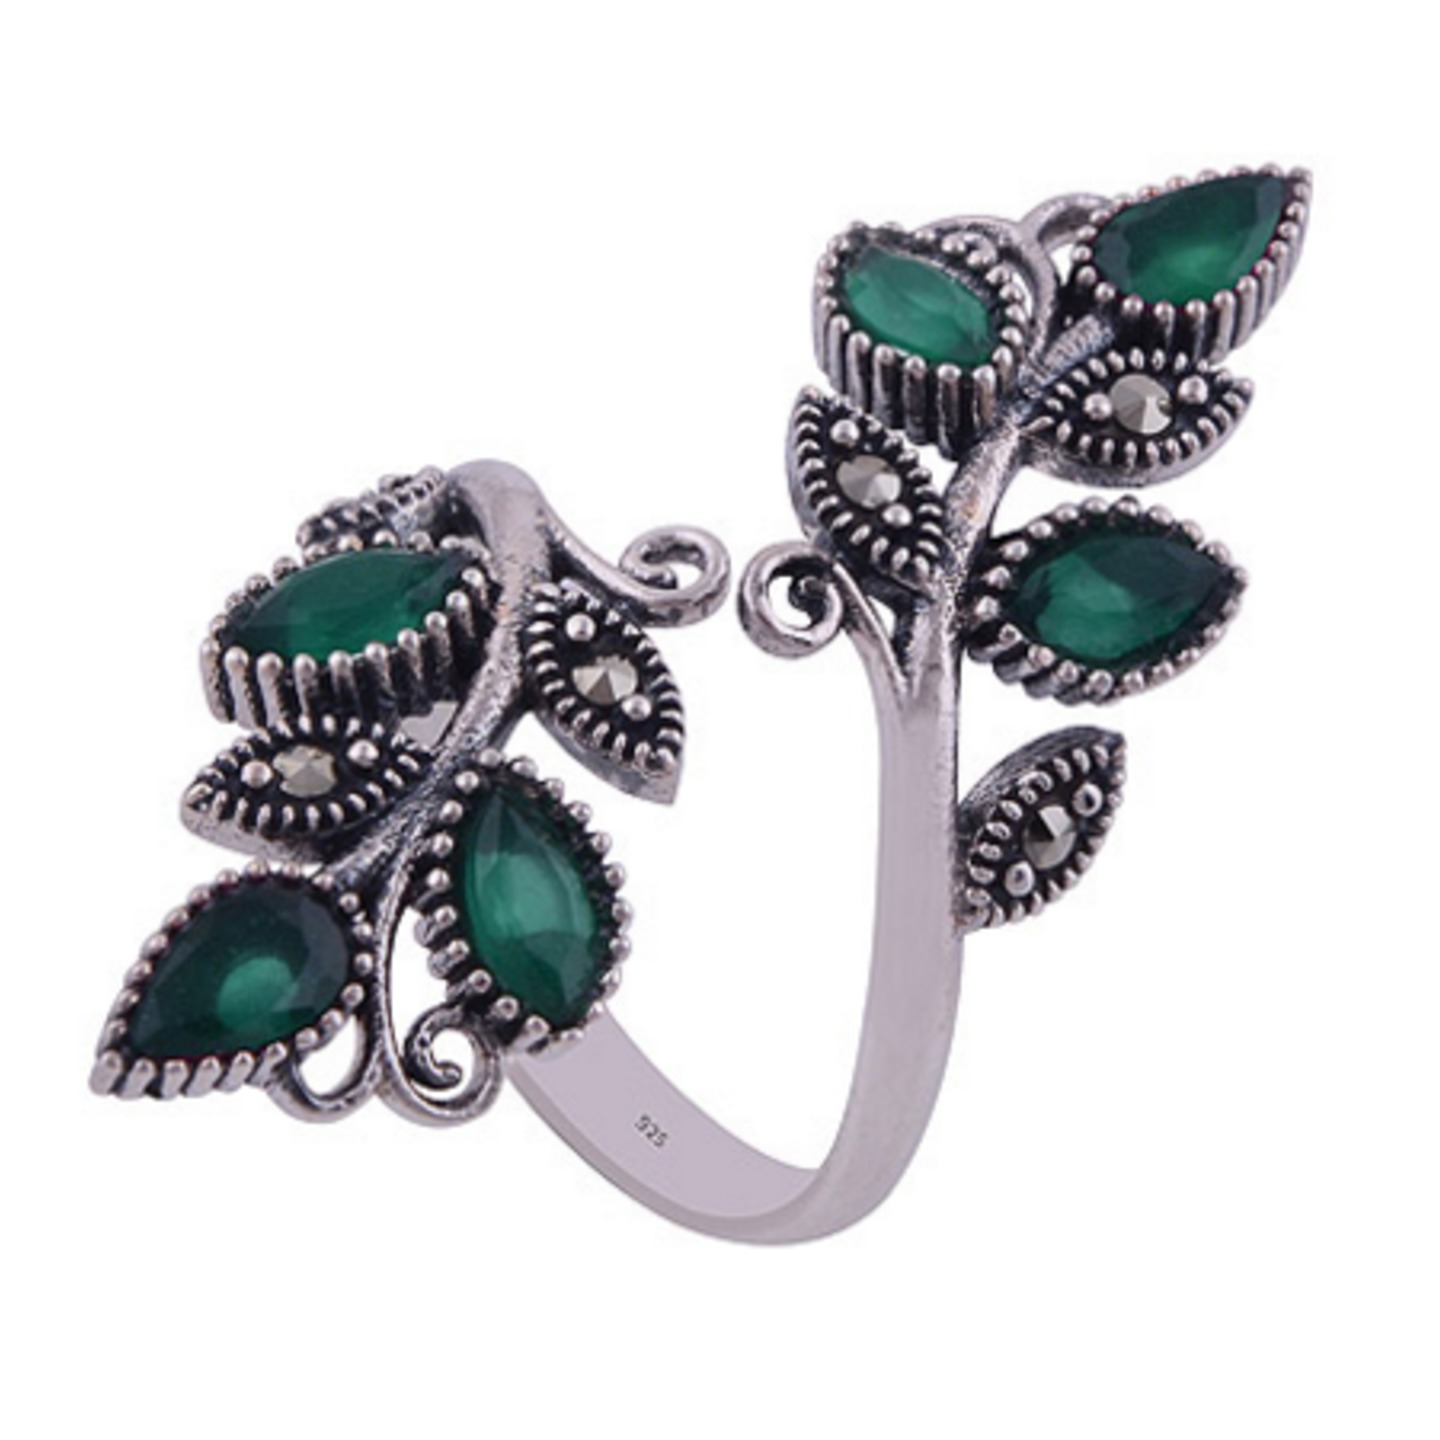 The Green Vine Silver Ring